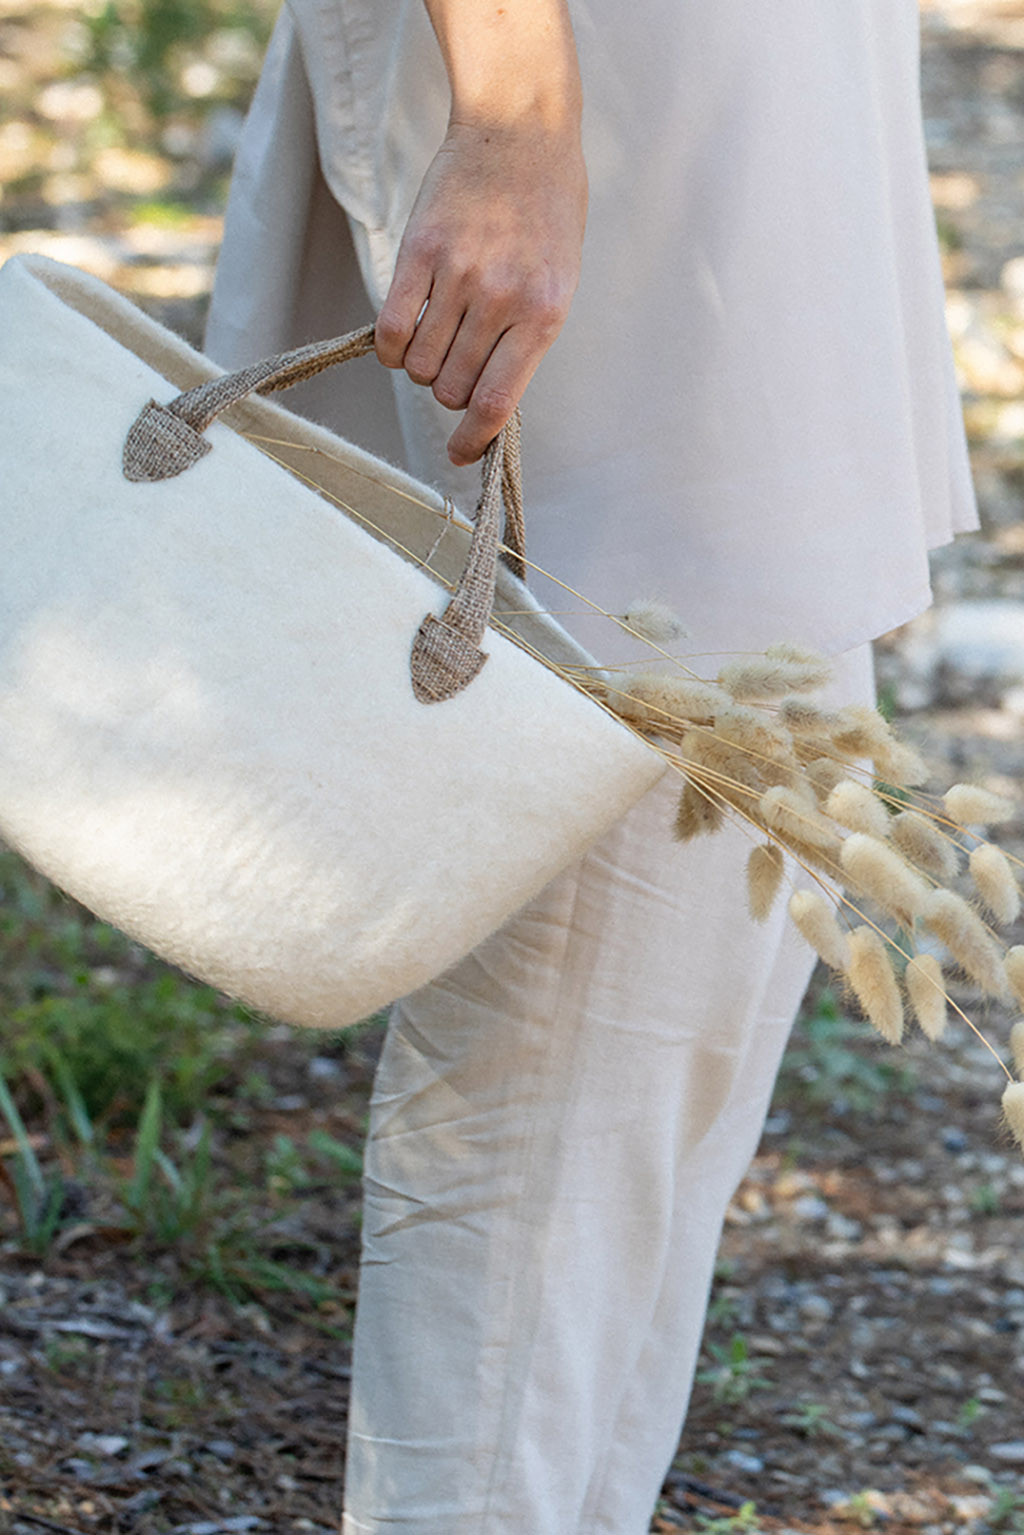 a small felt bag used to collect flowers from the garden